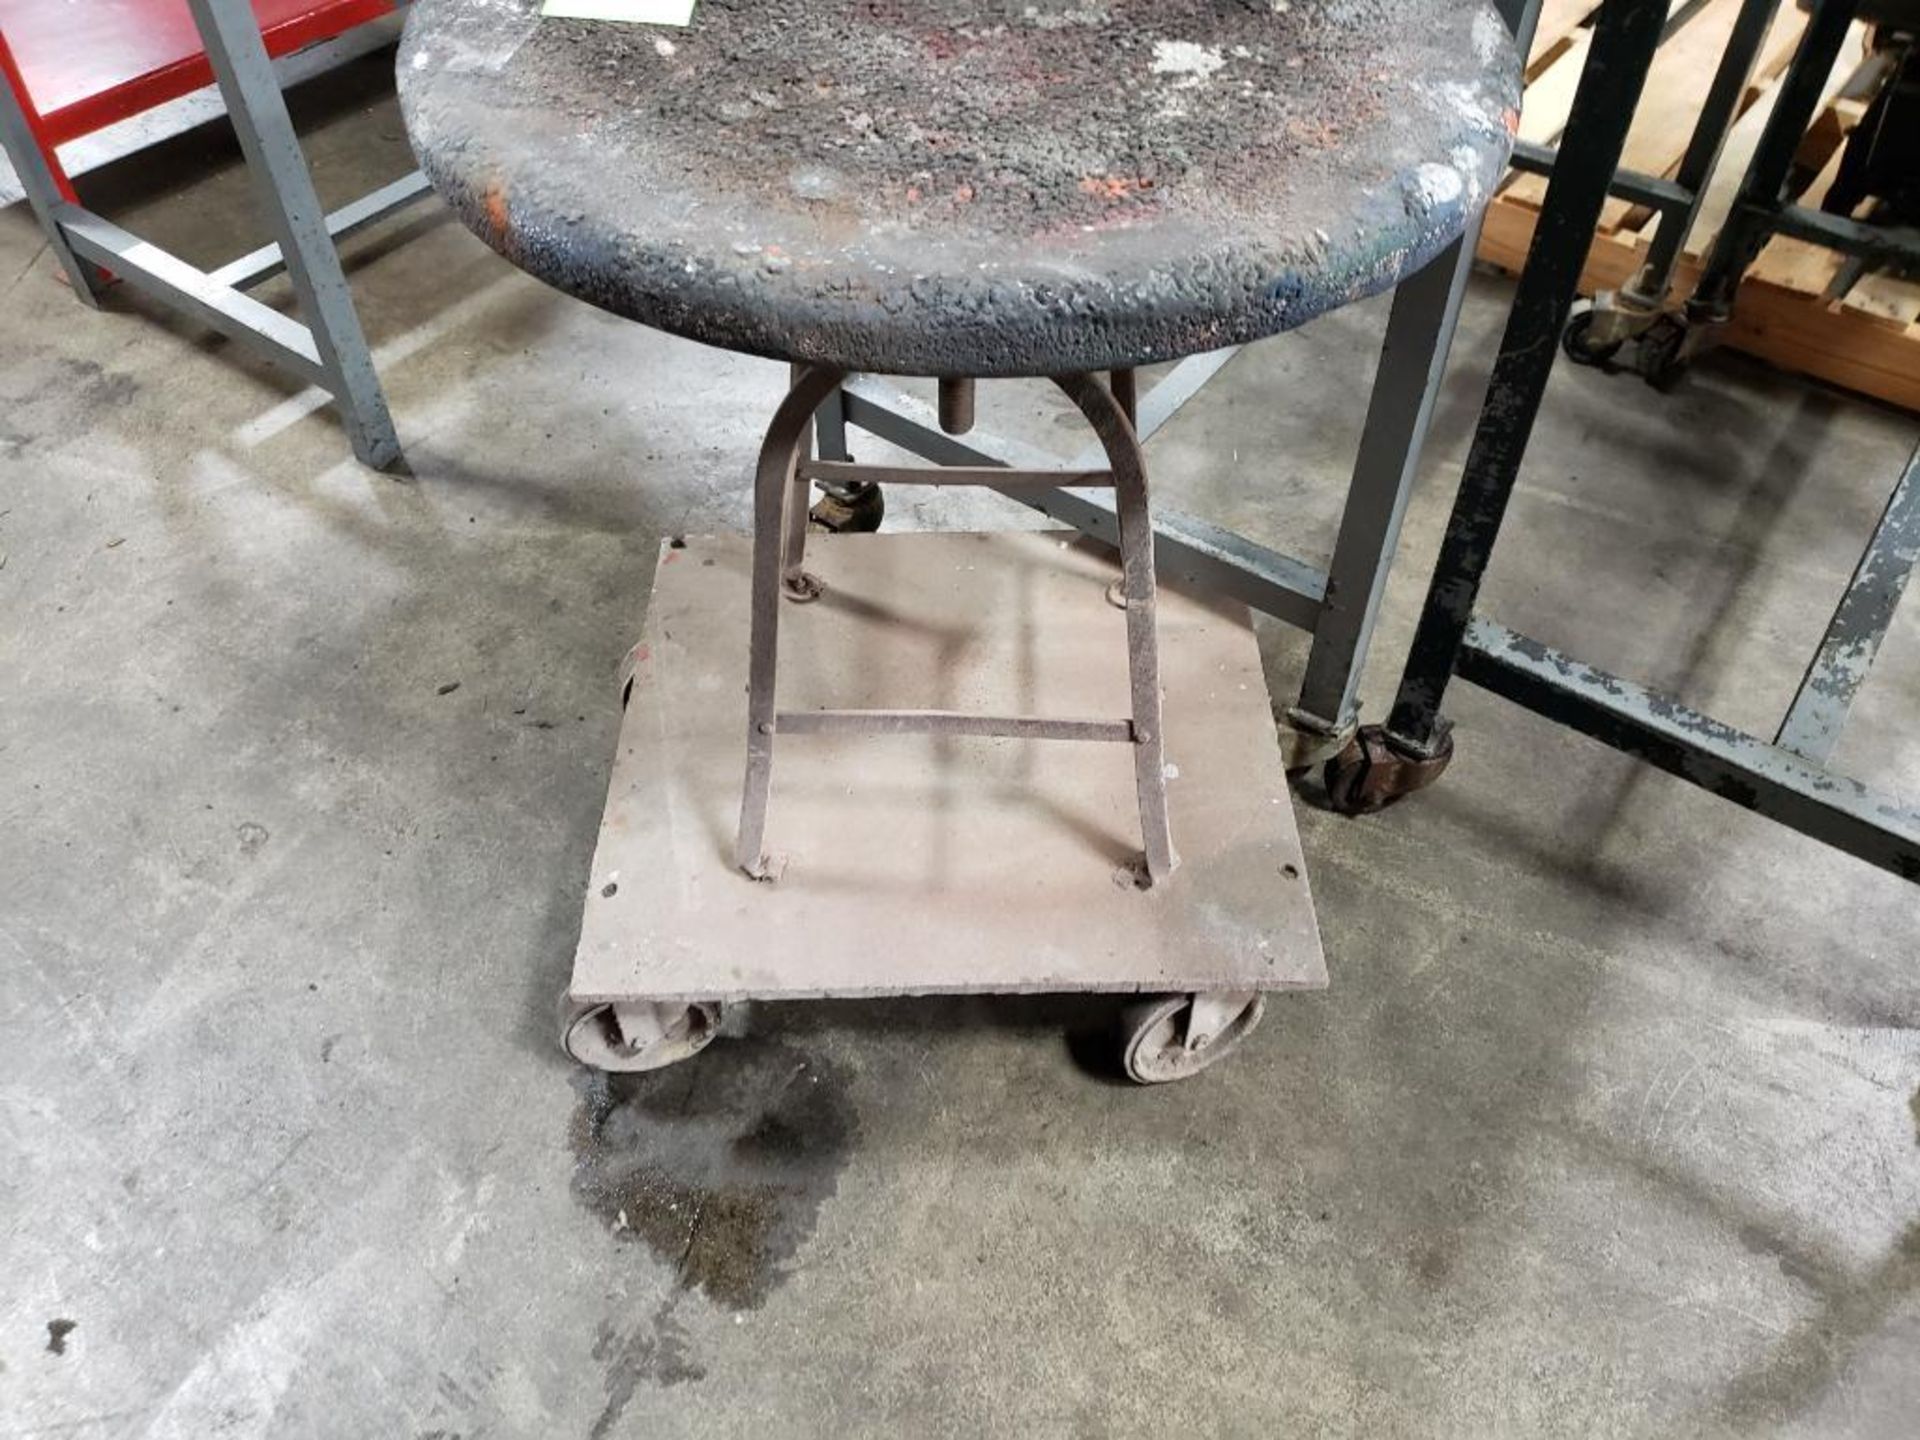 Qty 3 - Industrial metal rolling work table. 36x24x36, 36x24x36, 25x25x30 WxDxH. - Image 2 of 4